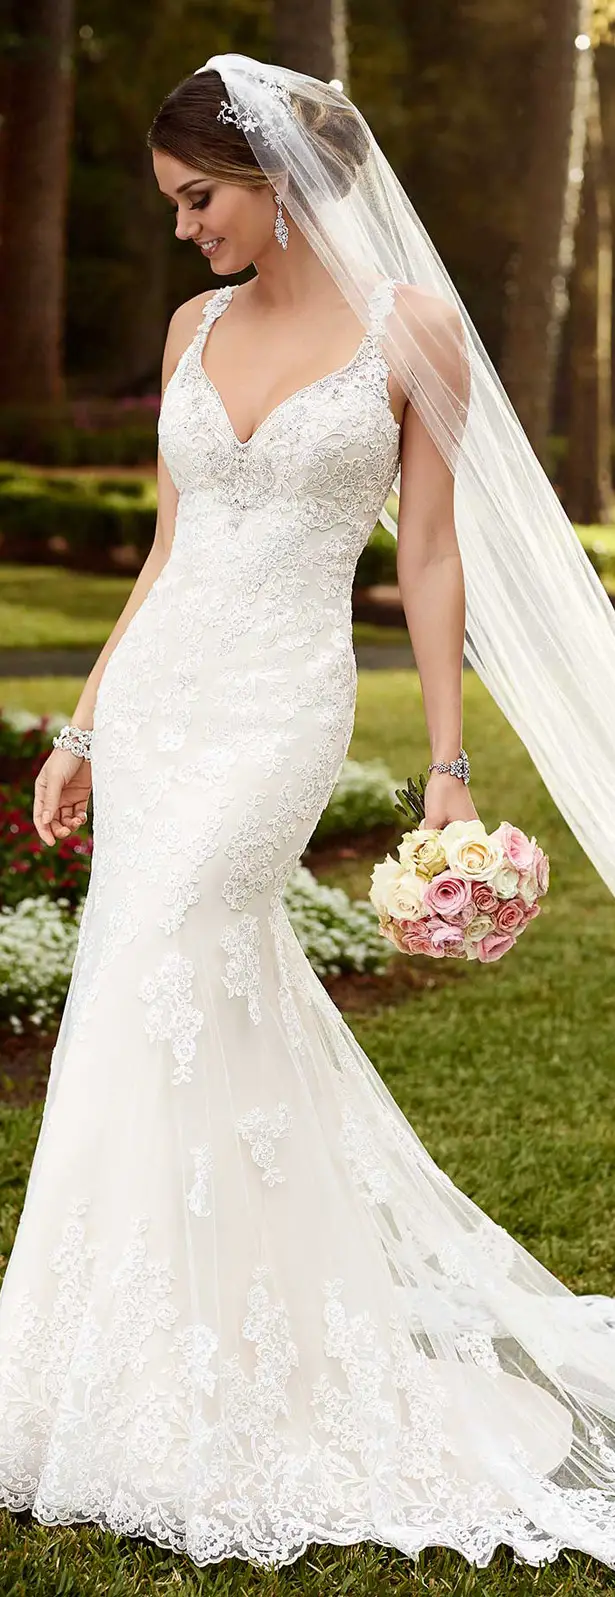 Stella York Fall 2015 Bridal Collection : Special Preview - Belle The ...